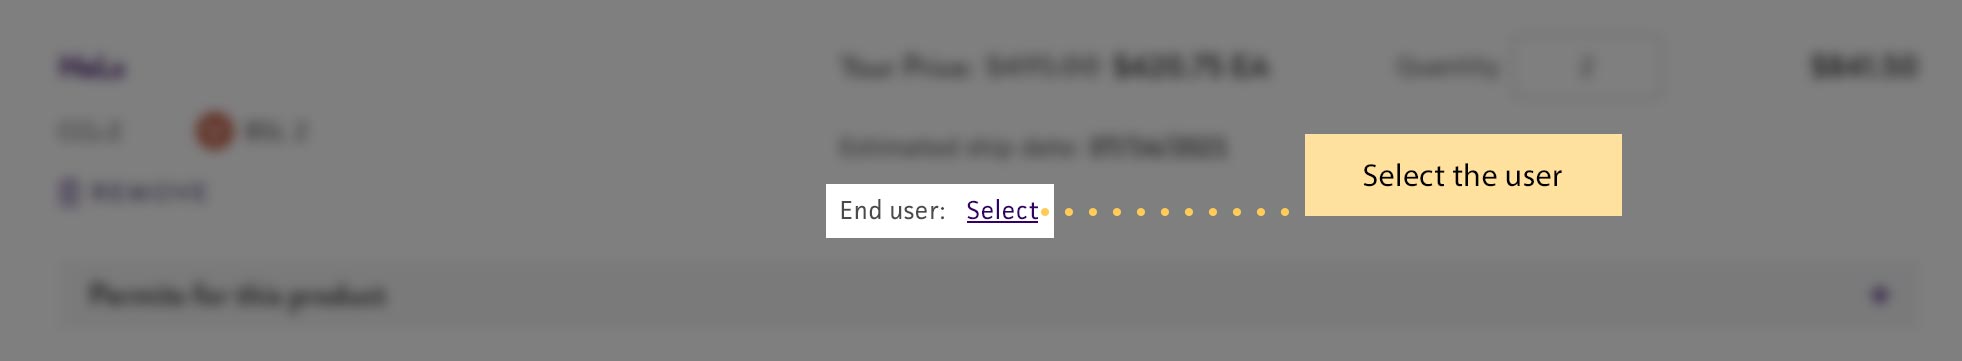 Select the End user